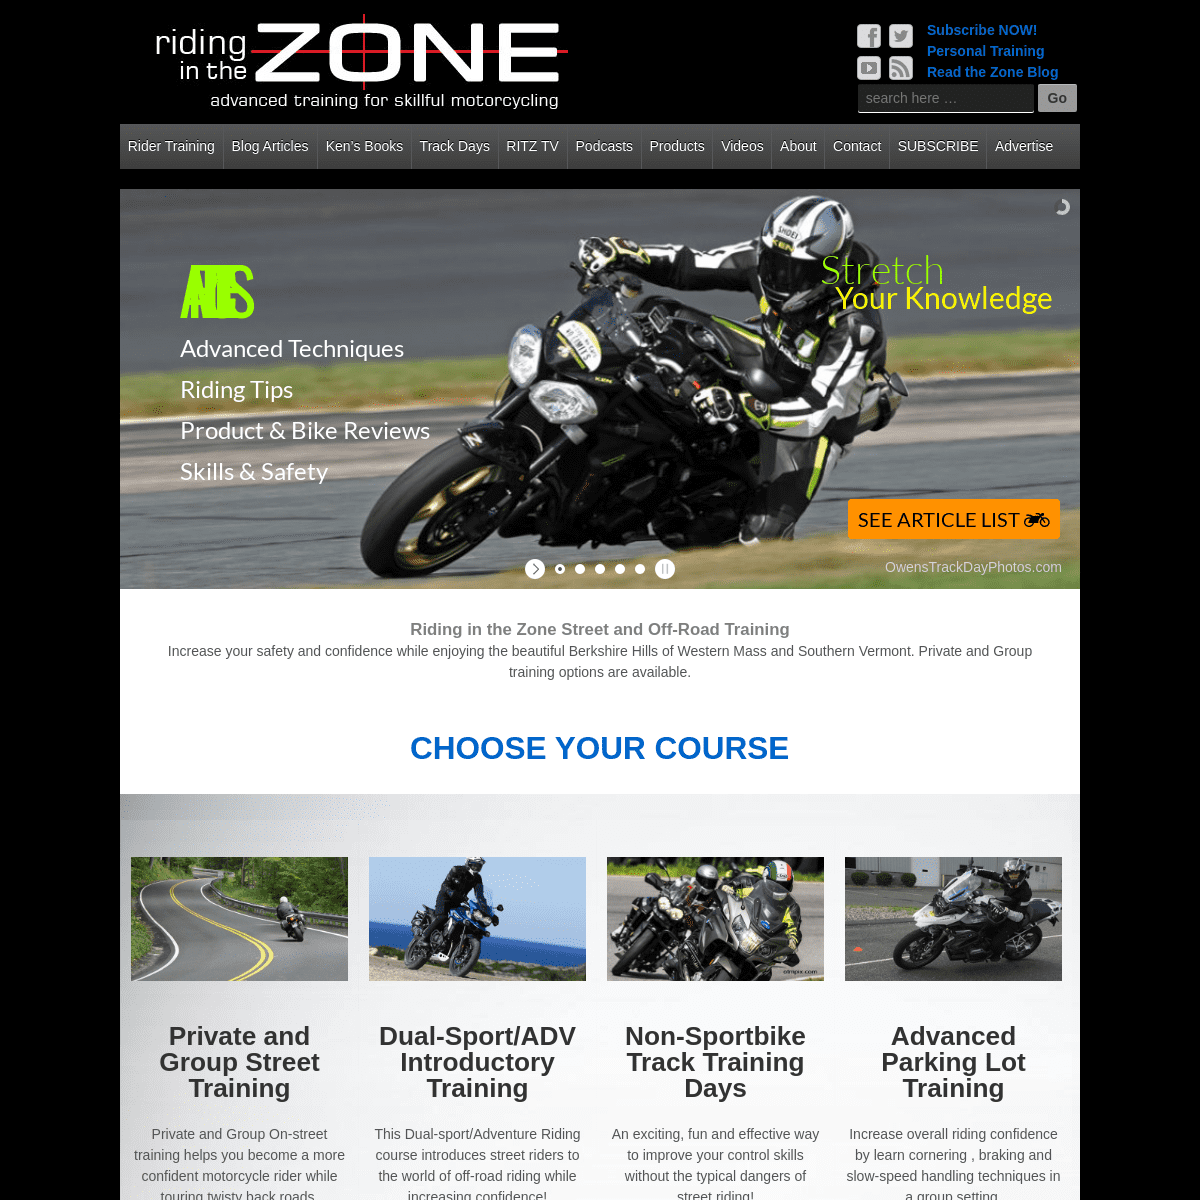 Riding in the Zone | Advanced Motorcycle Training Tours- Riding in the Zone, LLC